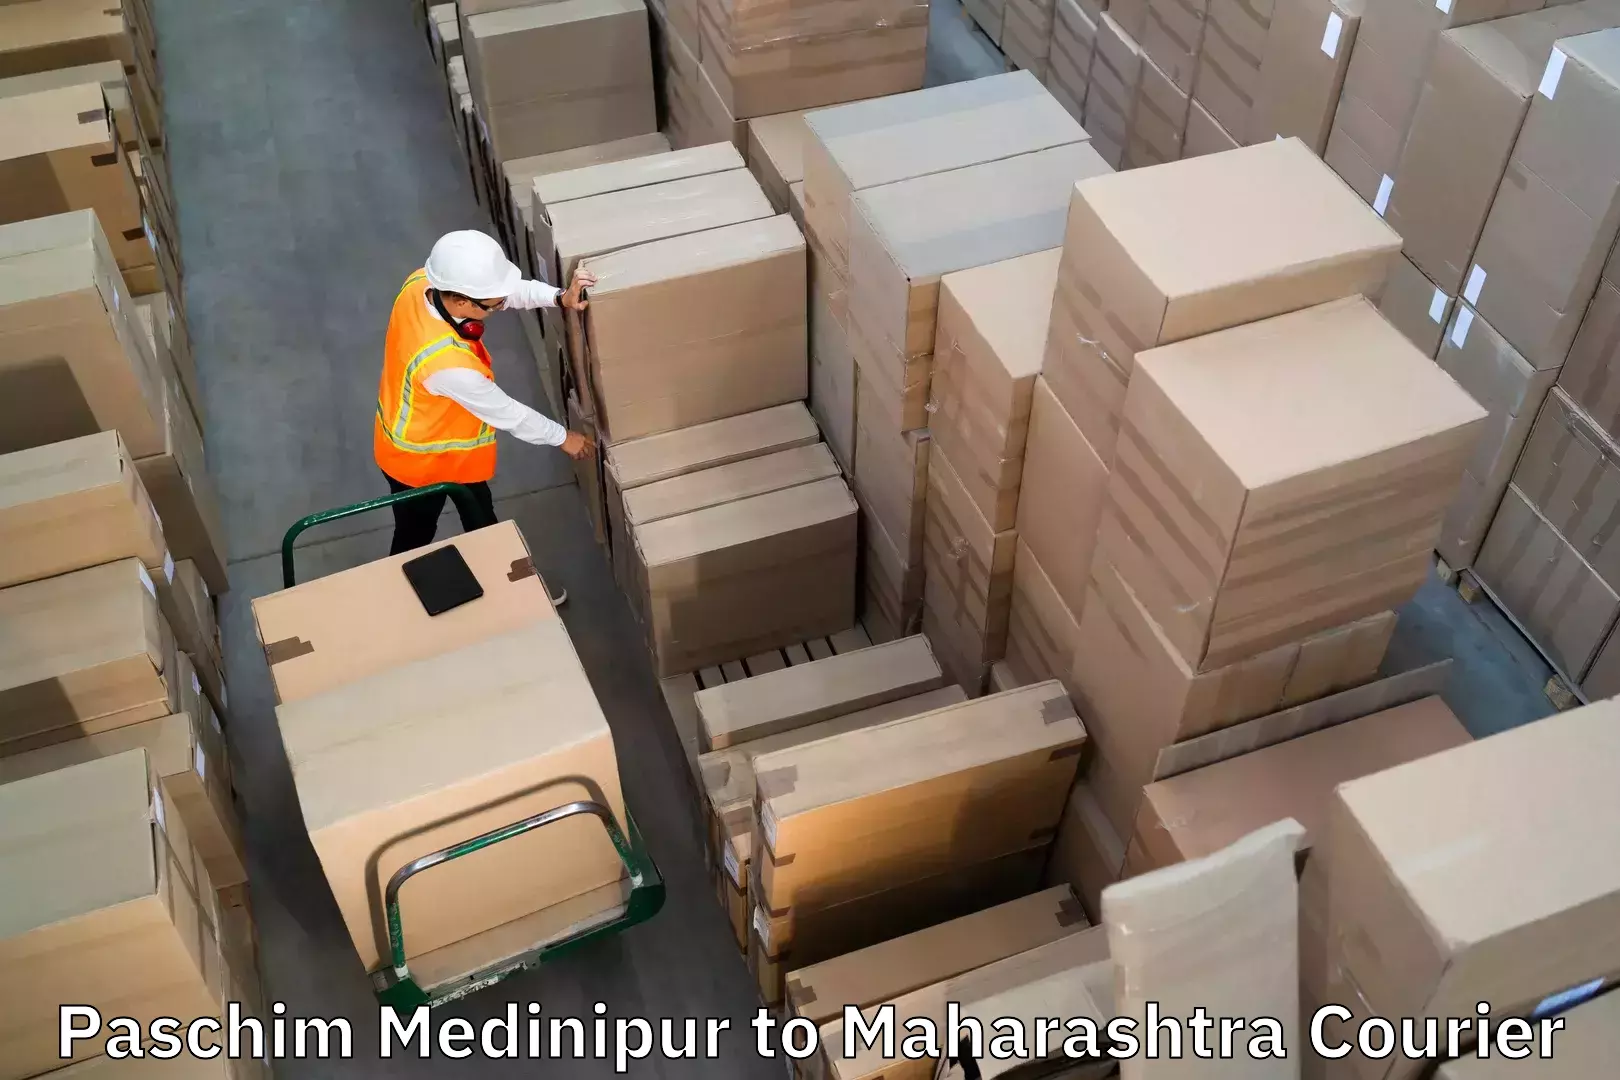 Baggage shipping experience in Paschim Medinipur to Thane